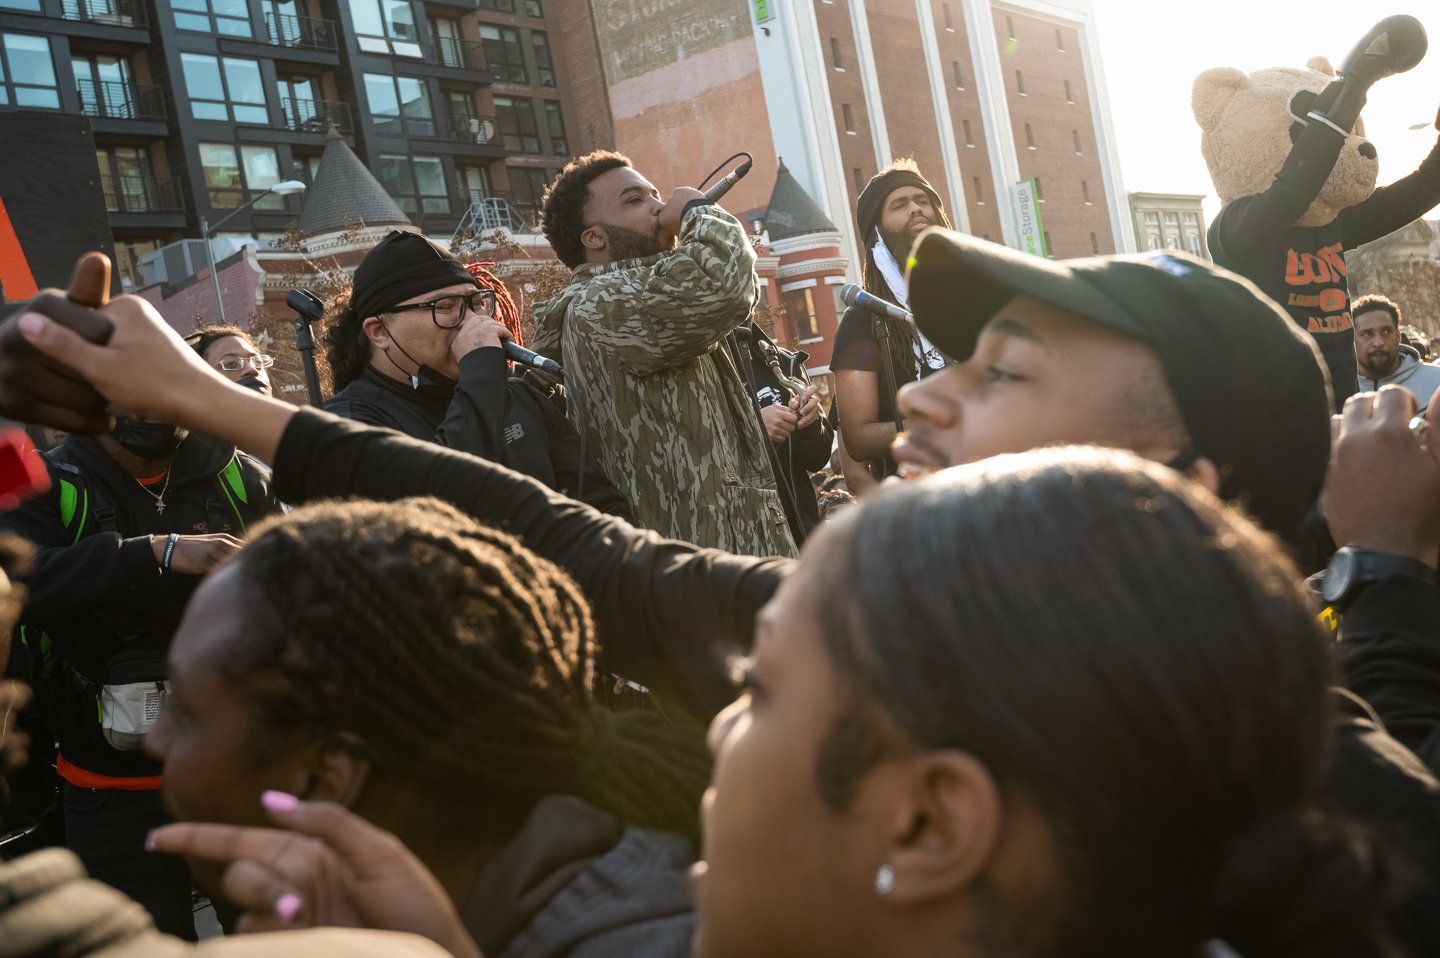  MC Justin “Yaddiya” Johnson, center, performs with local GoGo artists during a Moechella street concert and protest against proposed restrictions on amplified noise, in Washington, D.C., on March 14, 2021. (Photo by Graeme Sloan) 